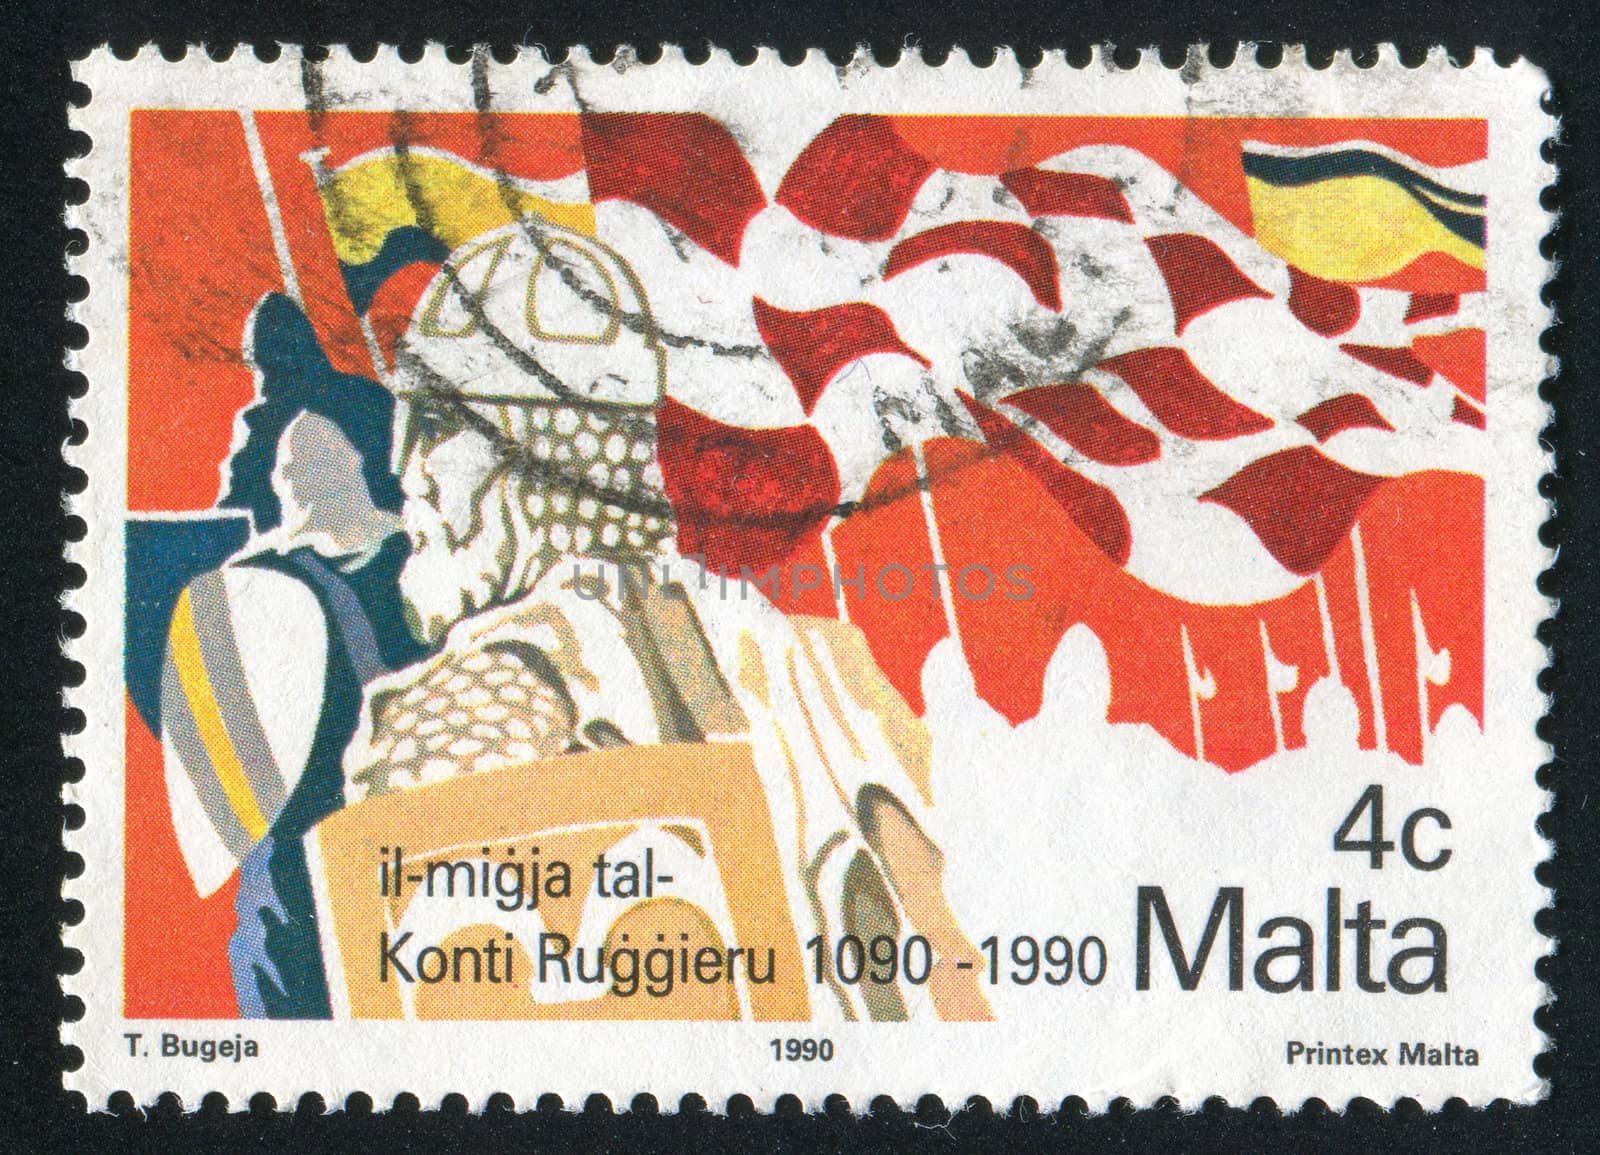 MALTA - CIRCA 1990: stamp printed by Malta, shows Army with Flags, circa 1990